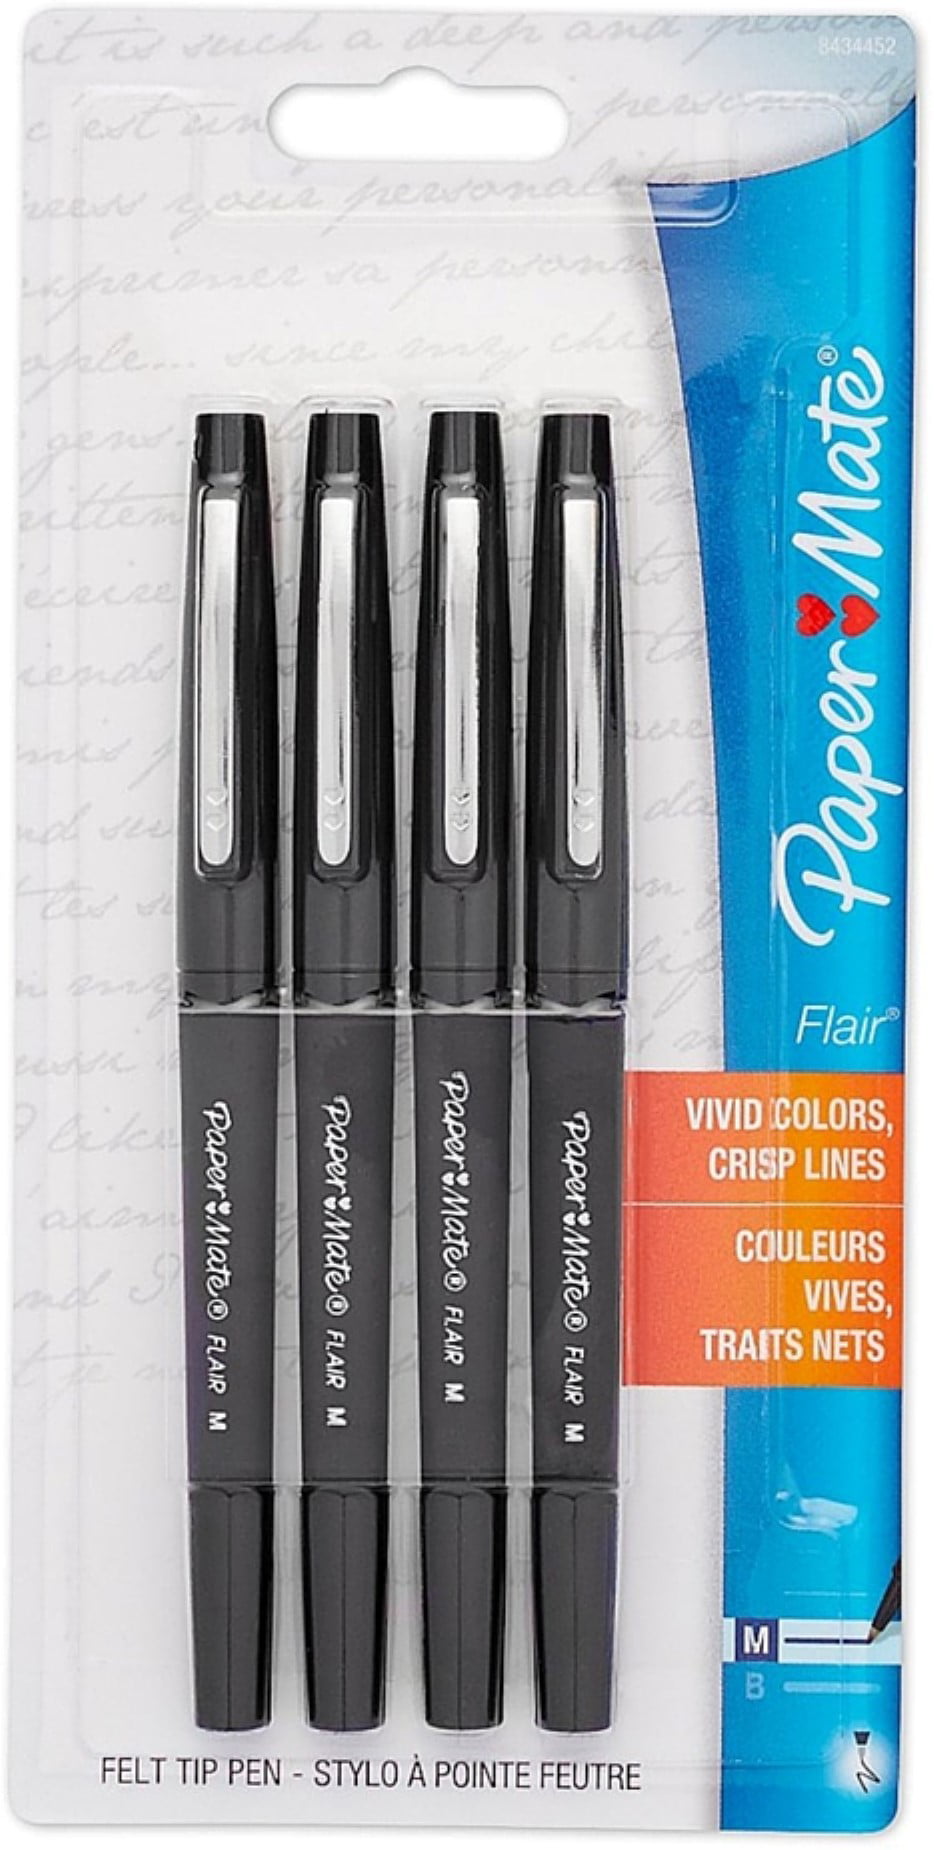 Paper Mate Flair Pen Pack of 4 Black 2 ea Point Guard Tip